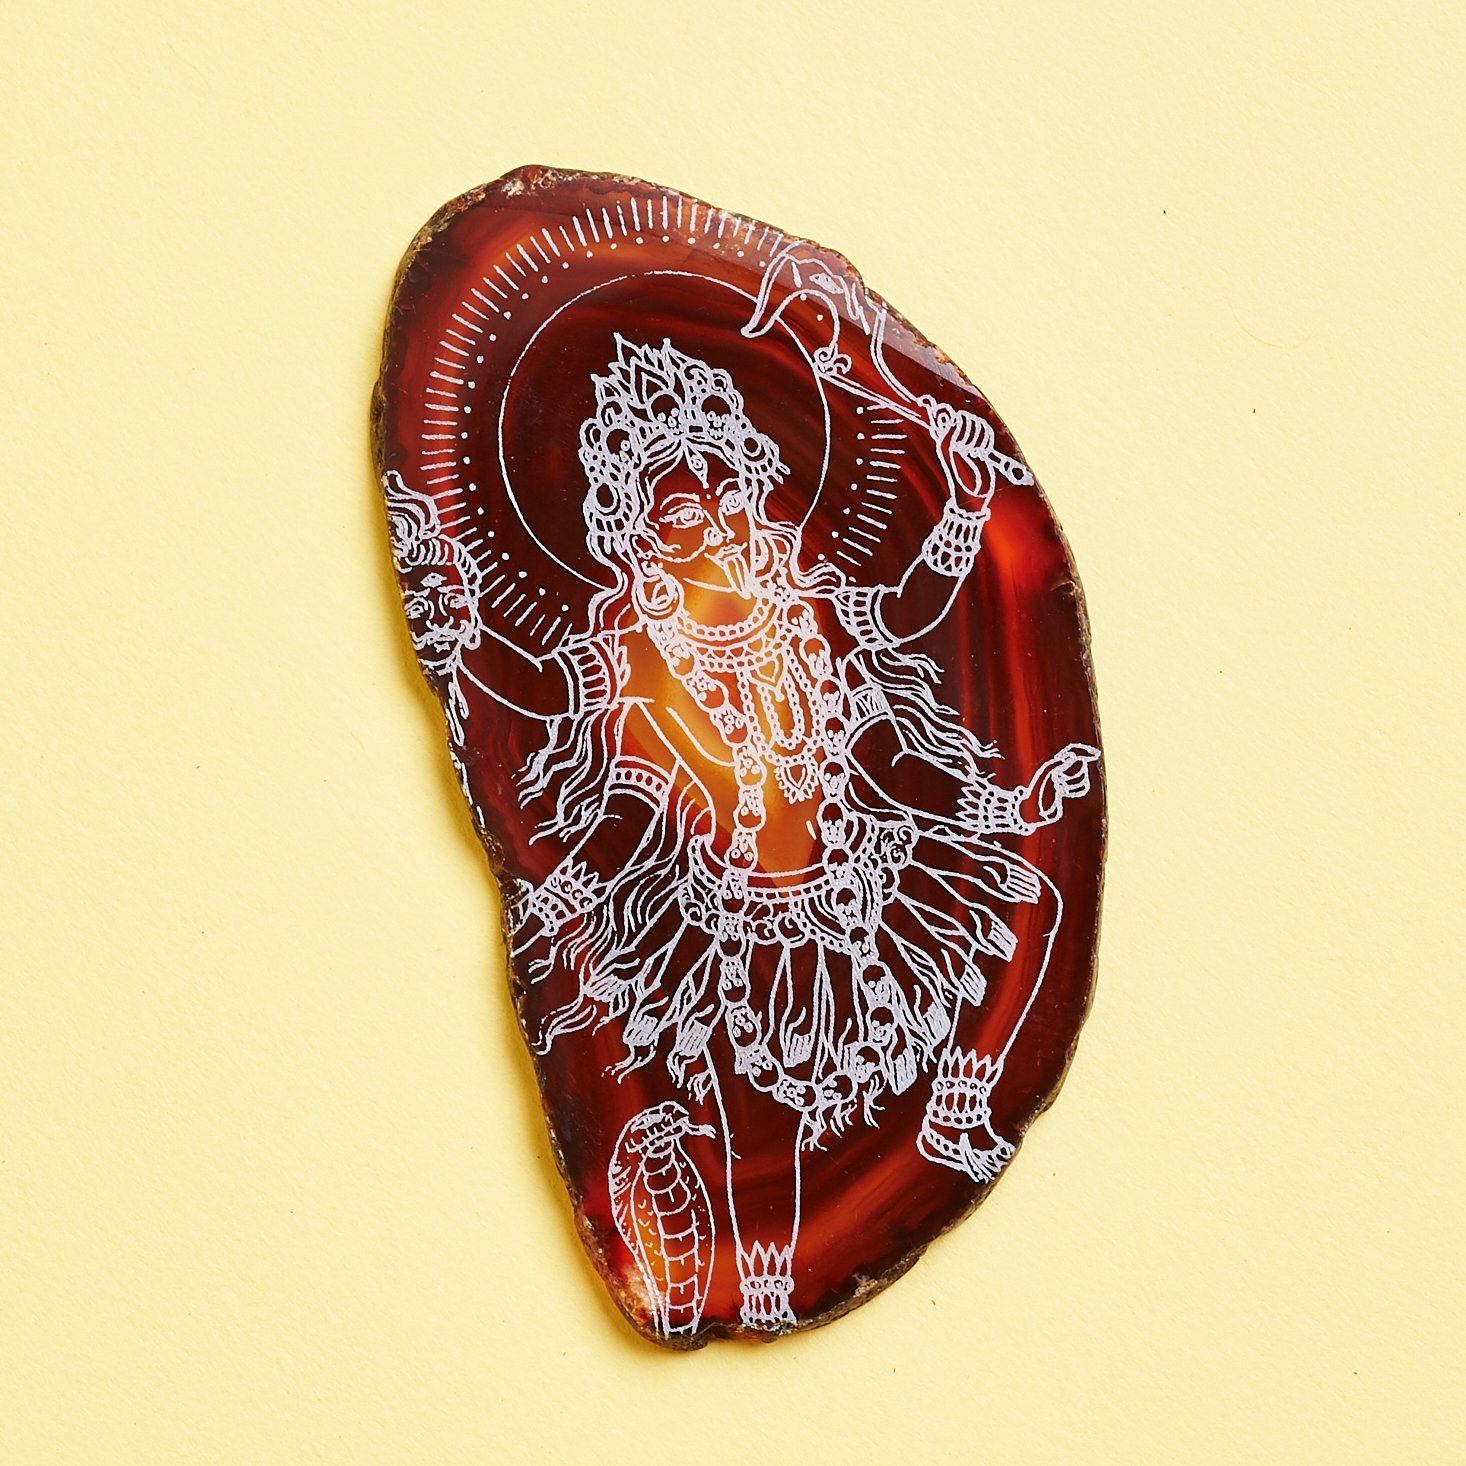 kali carved into agate stone